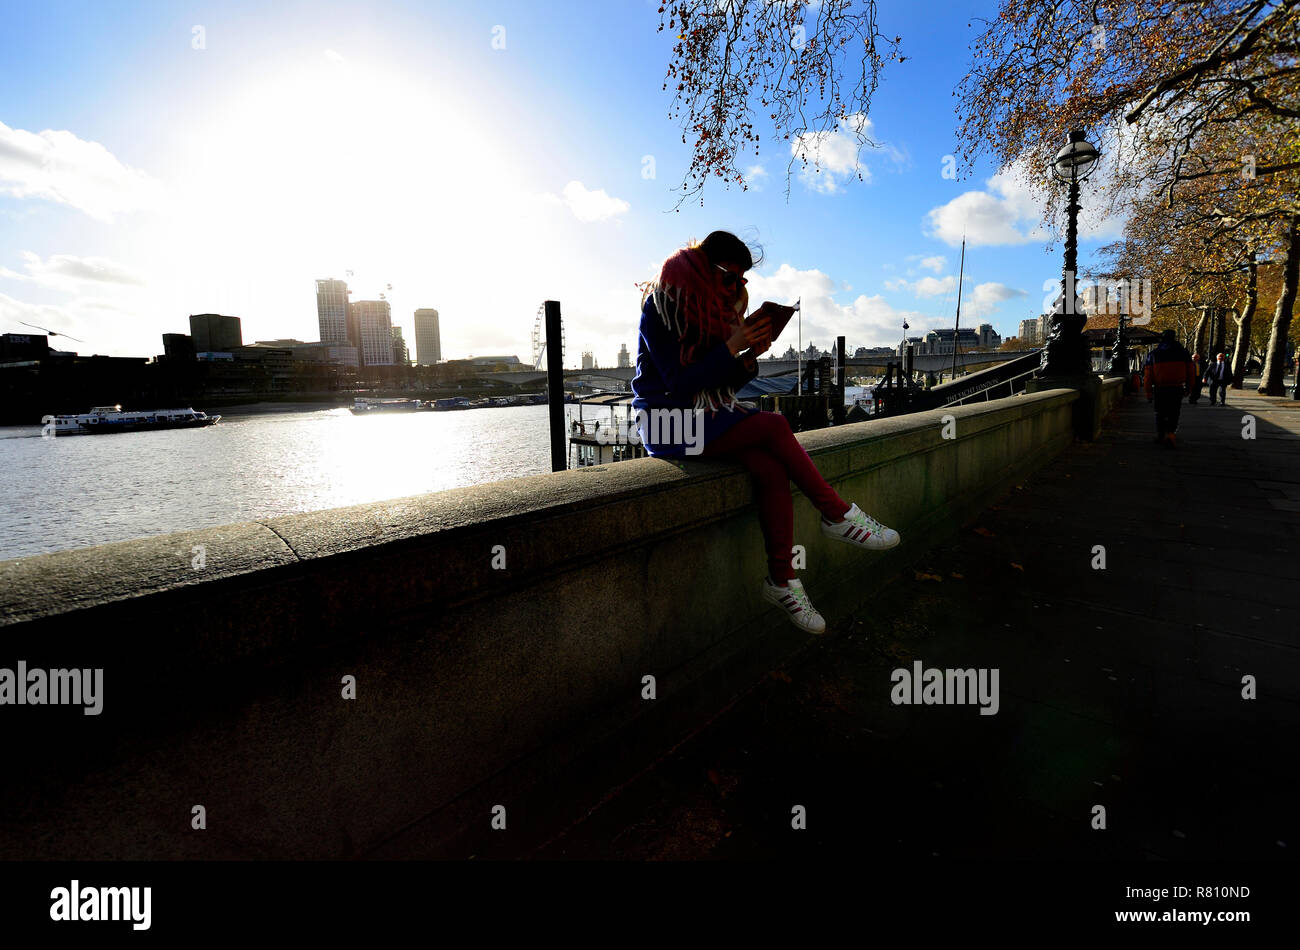 Young woman on her mobile phone, Victoria Embankment, London, England, UK. Winter Stock Photo